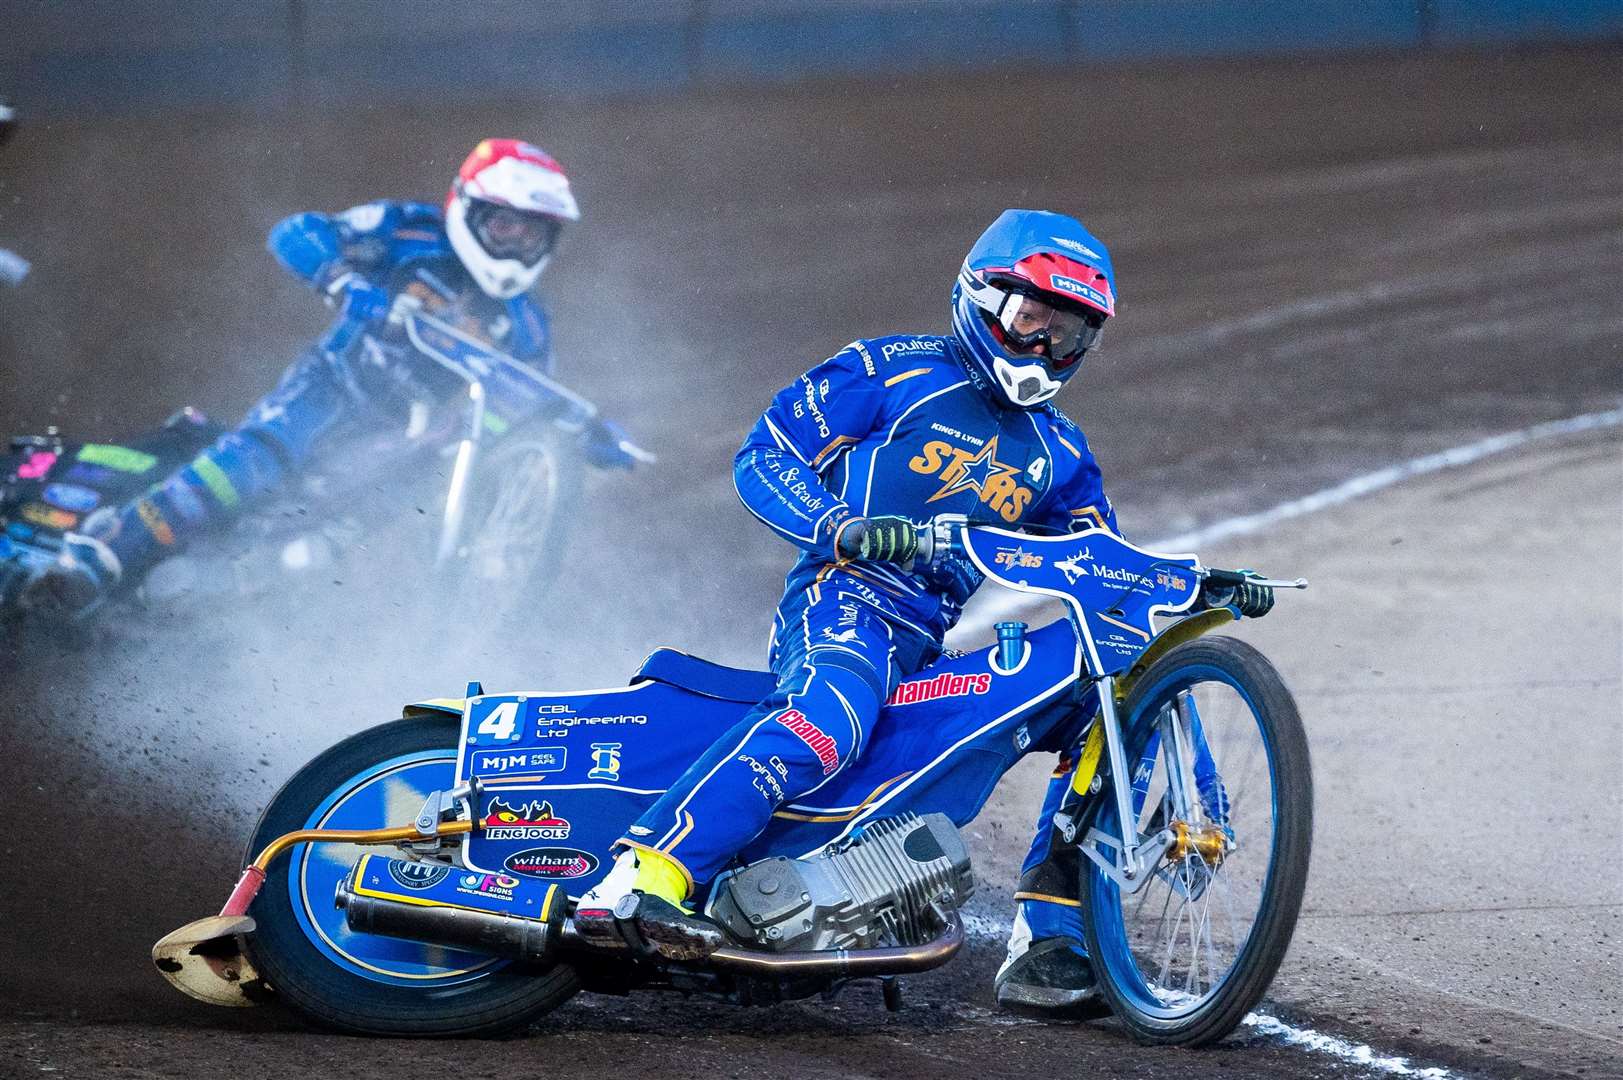 The Stars were without Krzysztof Kasprzak due to illness for their trip to Sheffield last night. Kasprzak's place in the team was taken by Wolverhampton’s Ryan Douglas who was booked in to to guest. Picture: Ian Burt